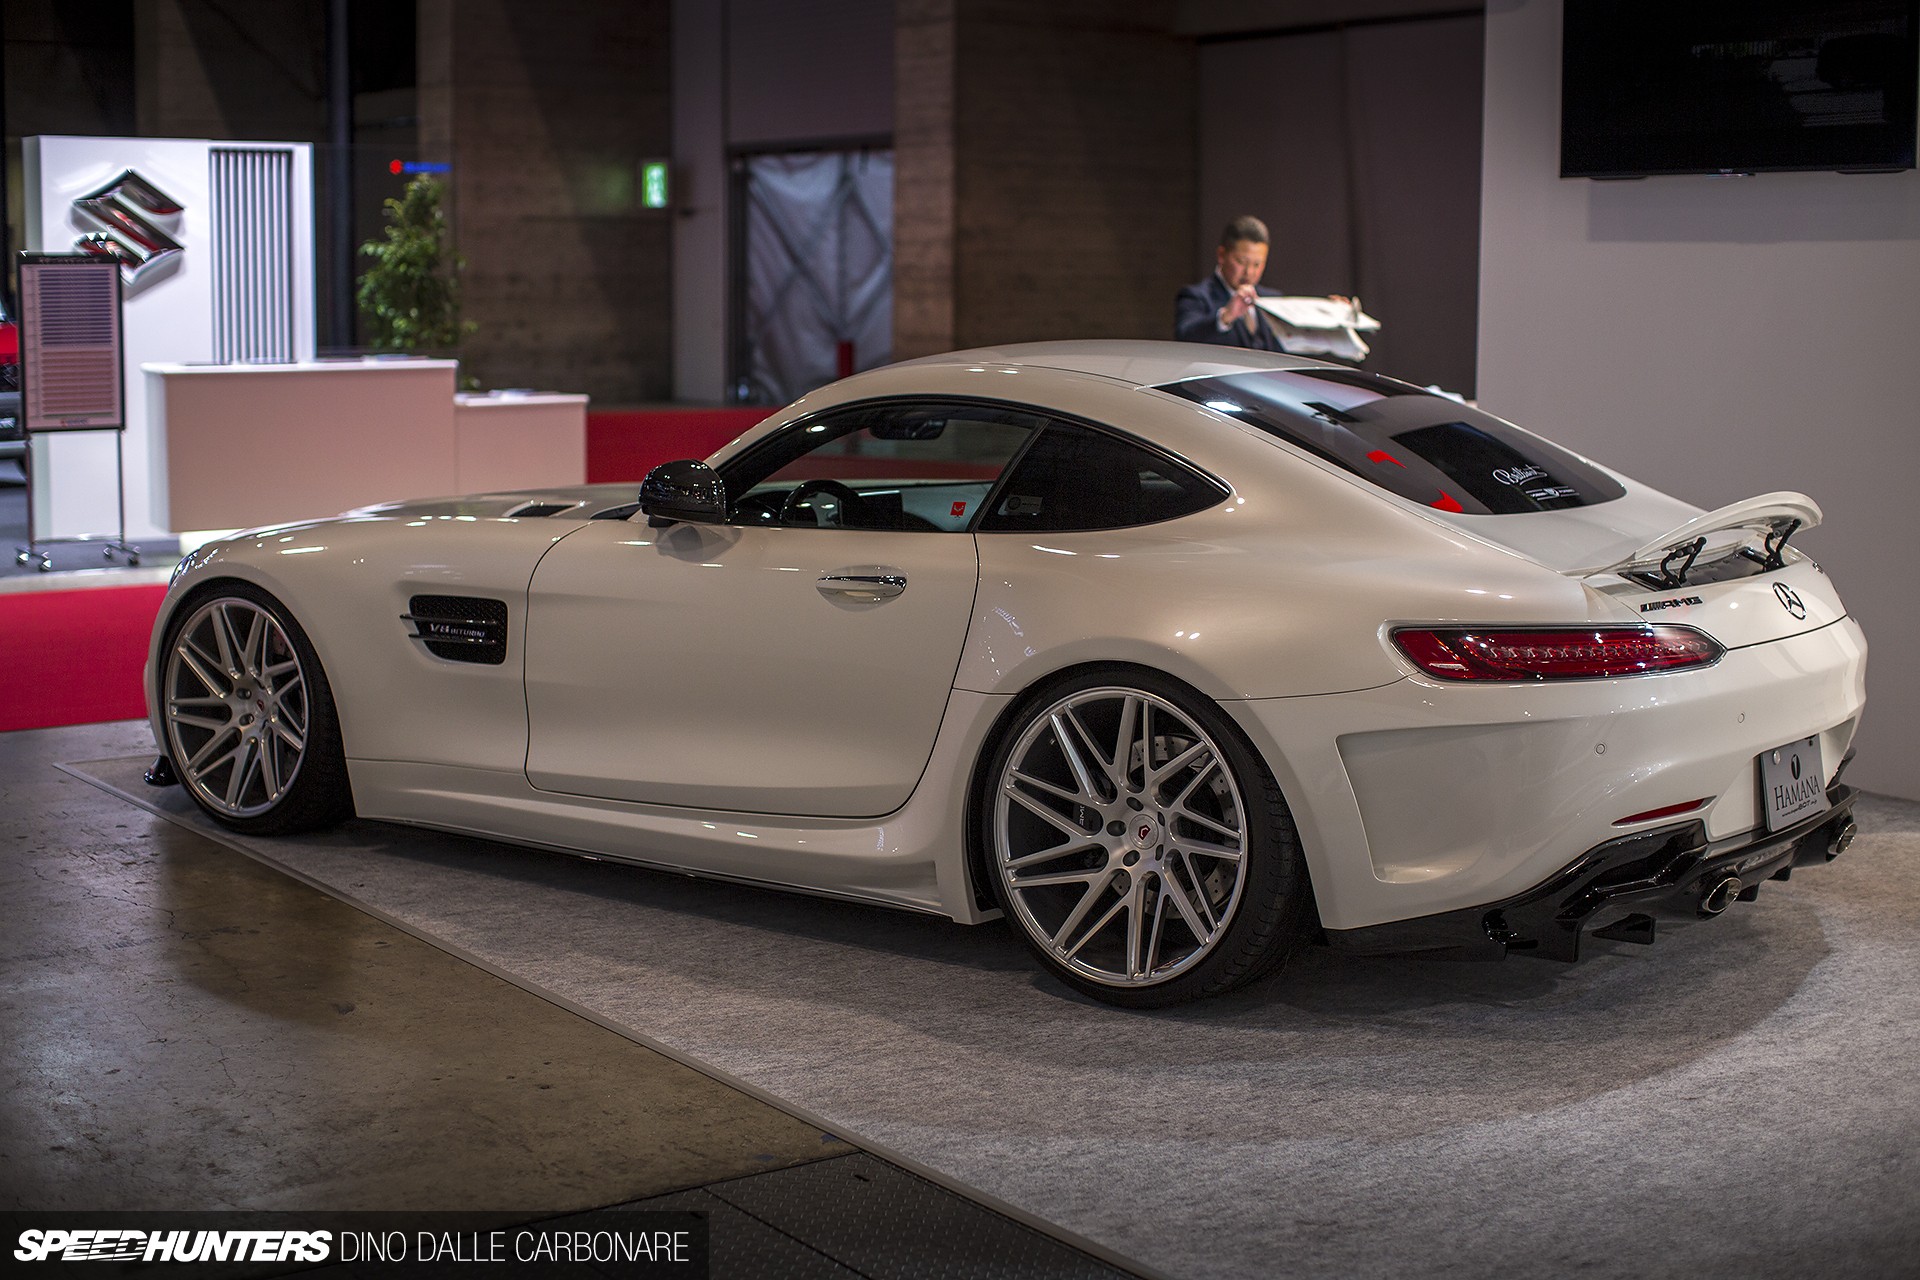 General 1920x1280 car Speedhunters car show modified Mercedes-Benz Vossen Mercedes-AMG GT watermarked white cars vehicle